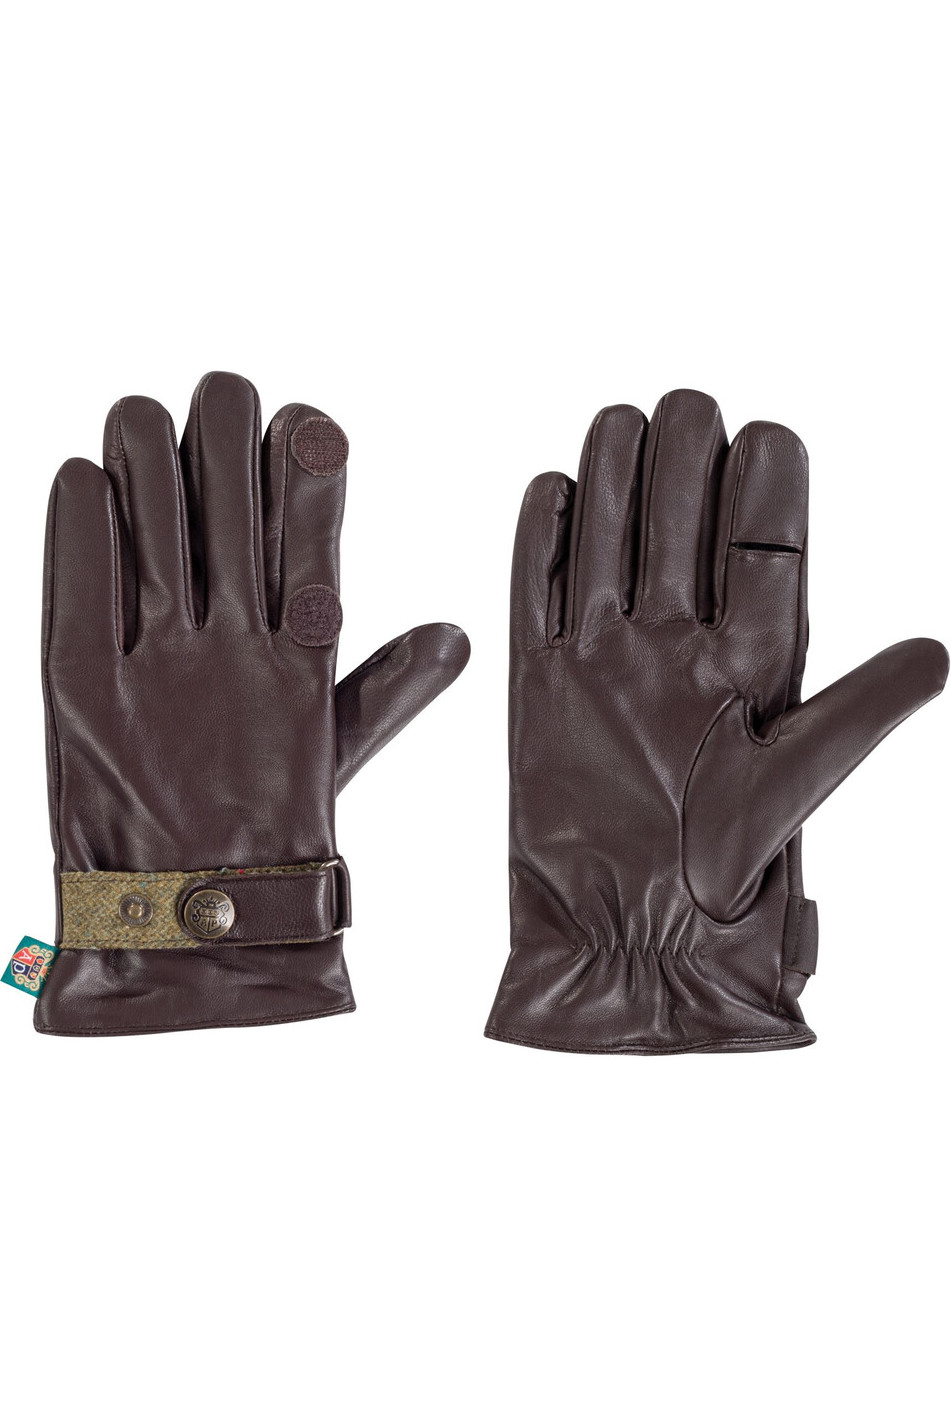 Alan Paine Mens Water Resistant Leather Shooting Gloves Country Hunting Shooting 